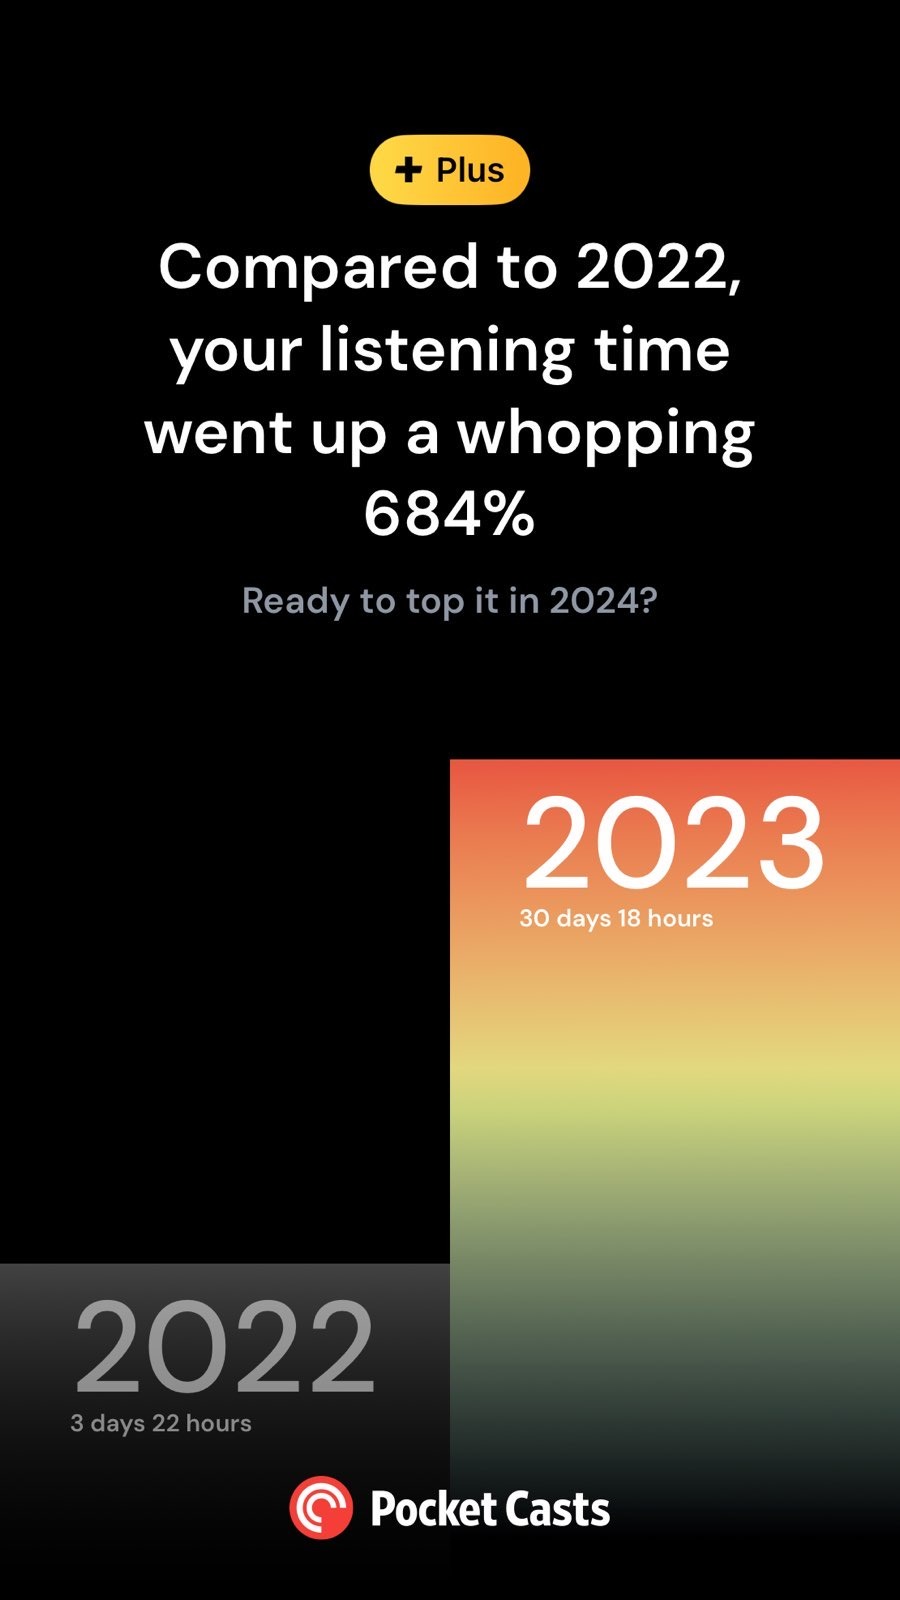 Compared to 2022, your listening time went up a whopping 684%. Ready to top it in 2024?

2023: 30 days 18 hours
2022: 3 days 22 hours